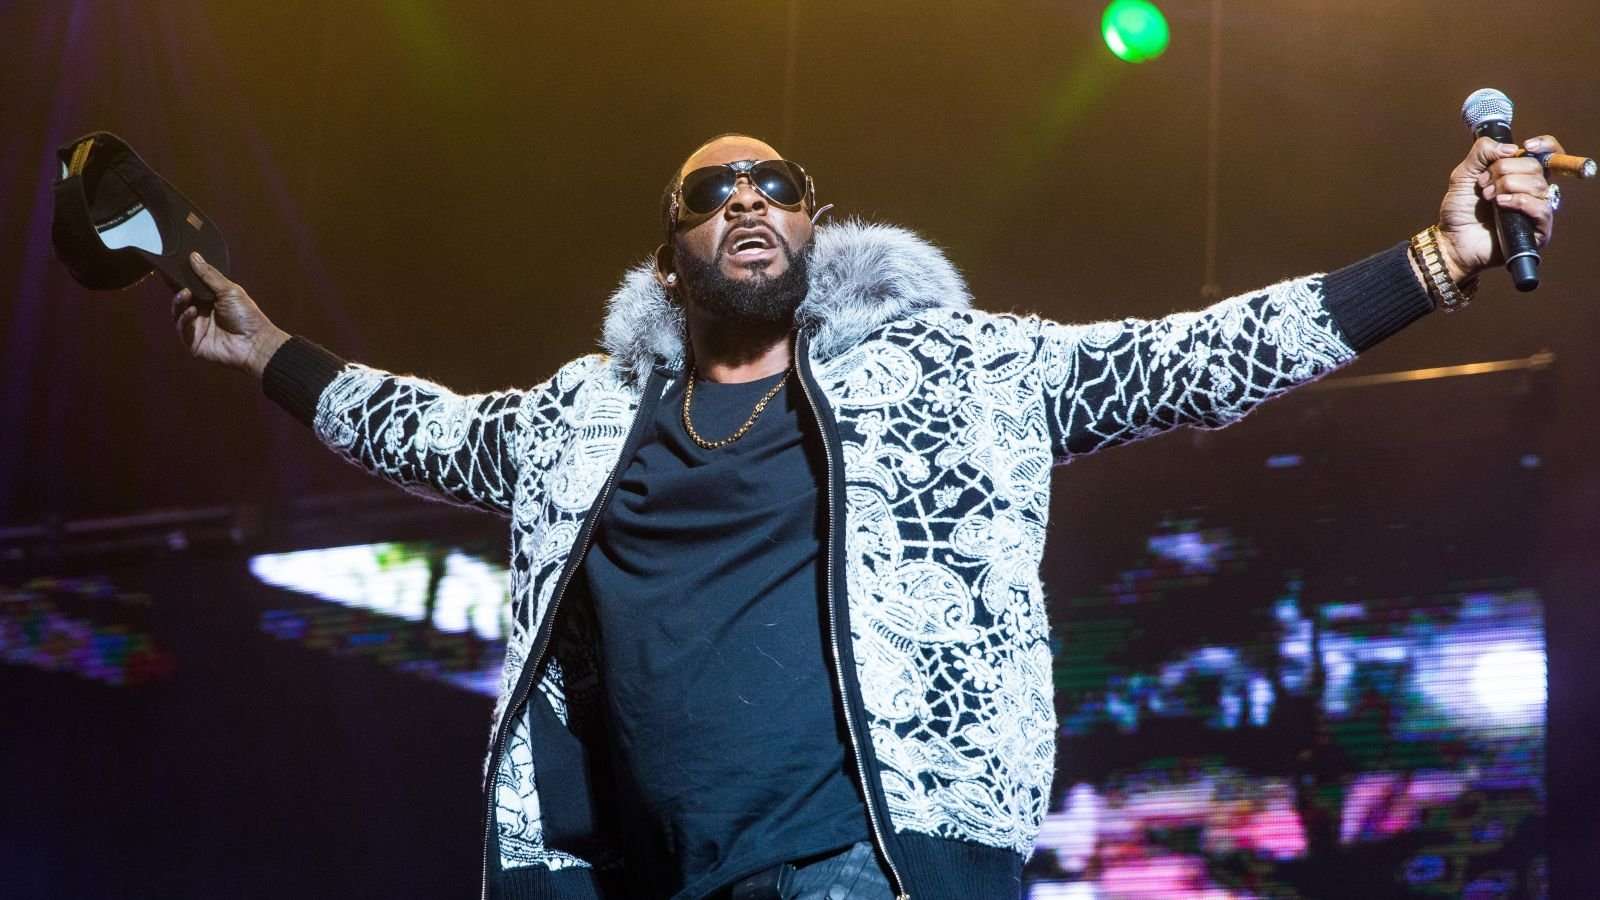 image for R.Kelly performance canceled after protests surrounding those "cult" allegations